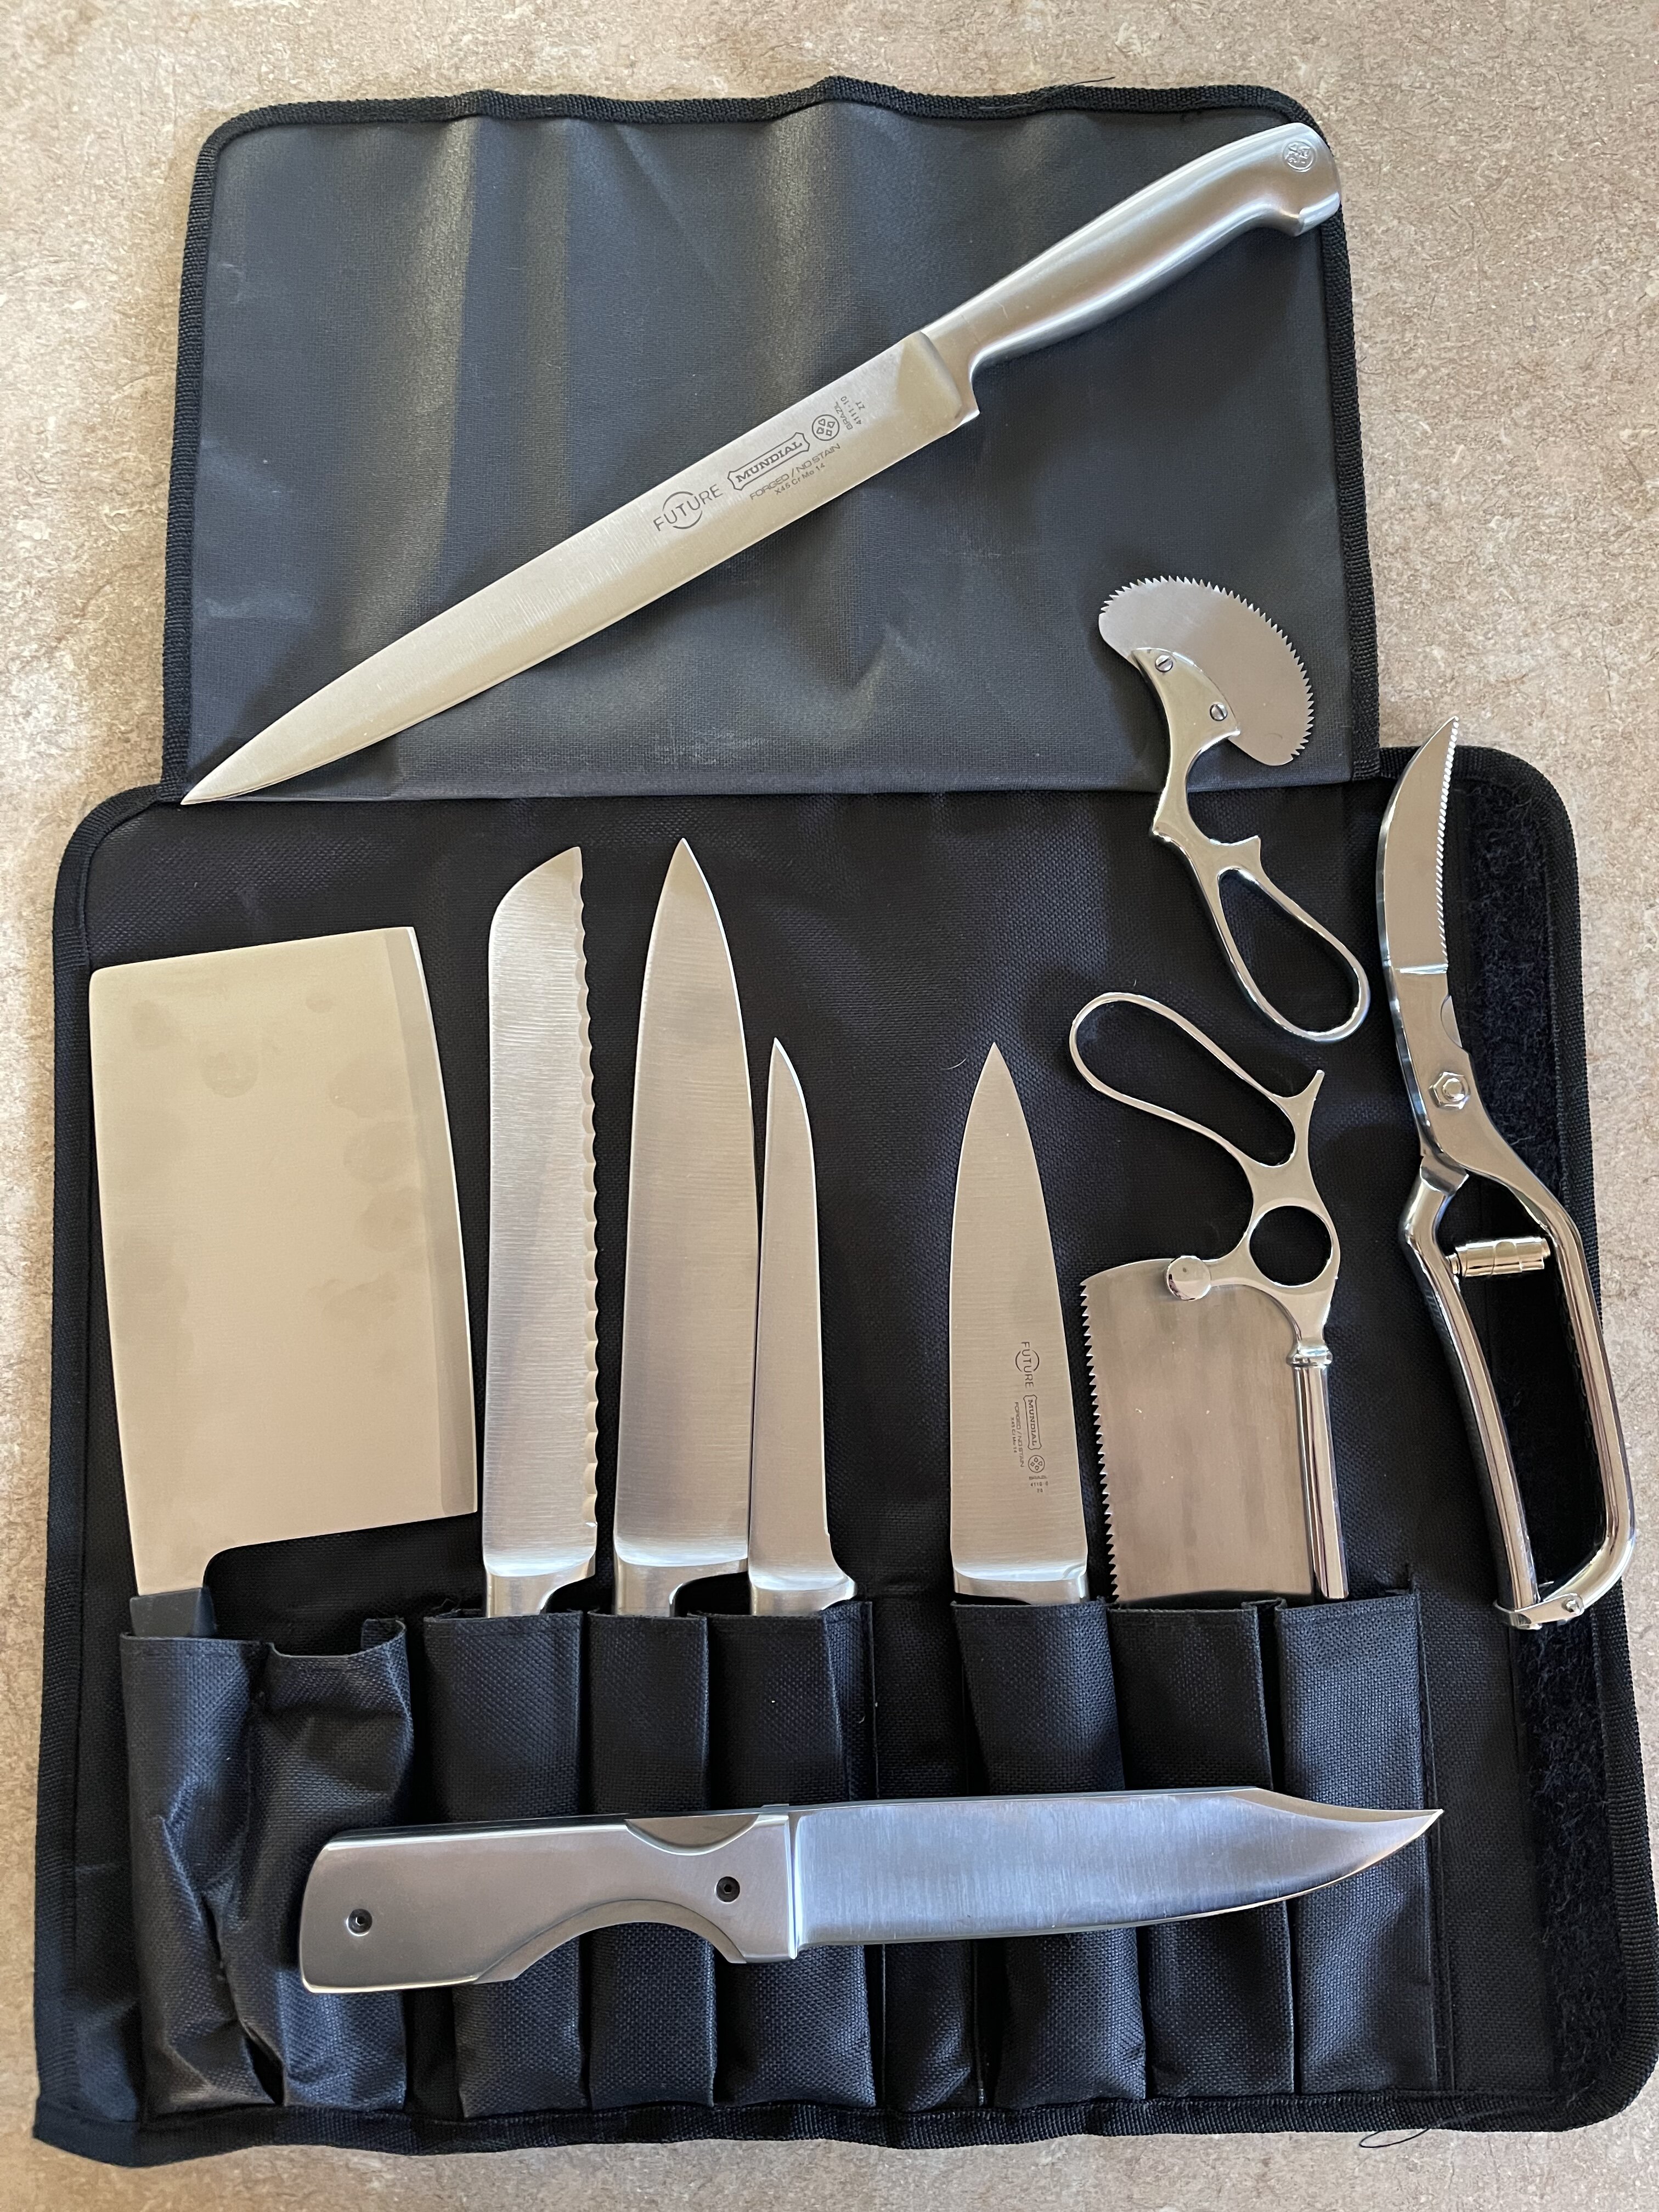 Dexter's kill tools. Majority of which were custom-made for the